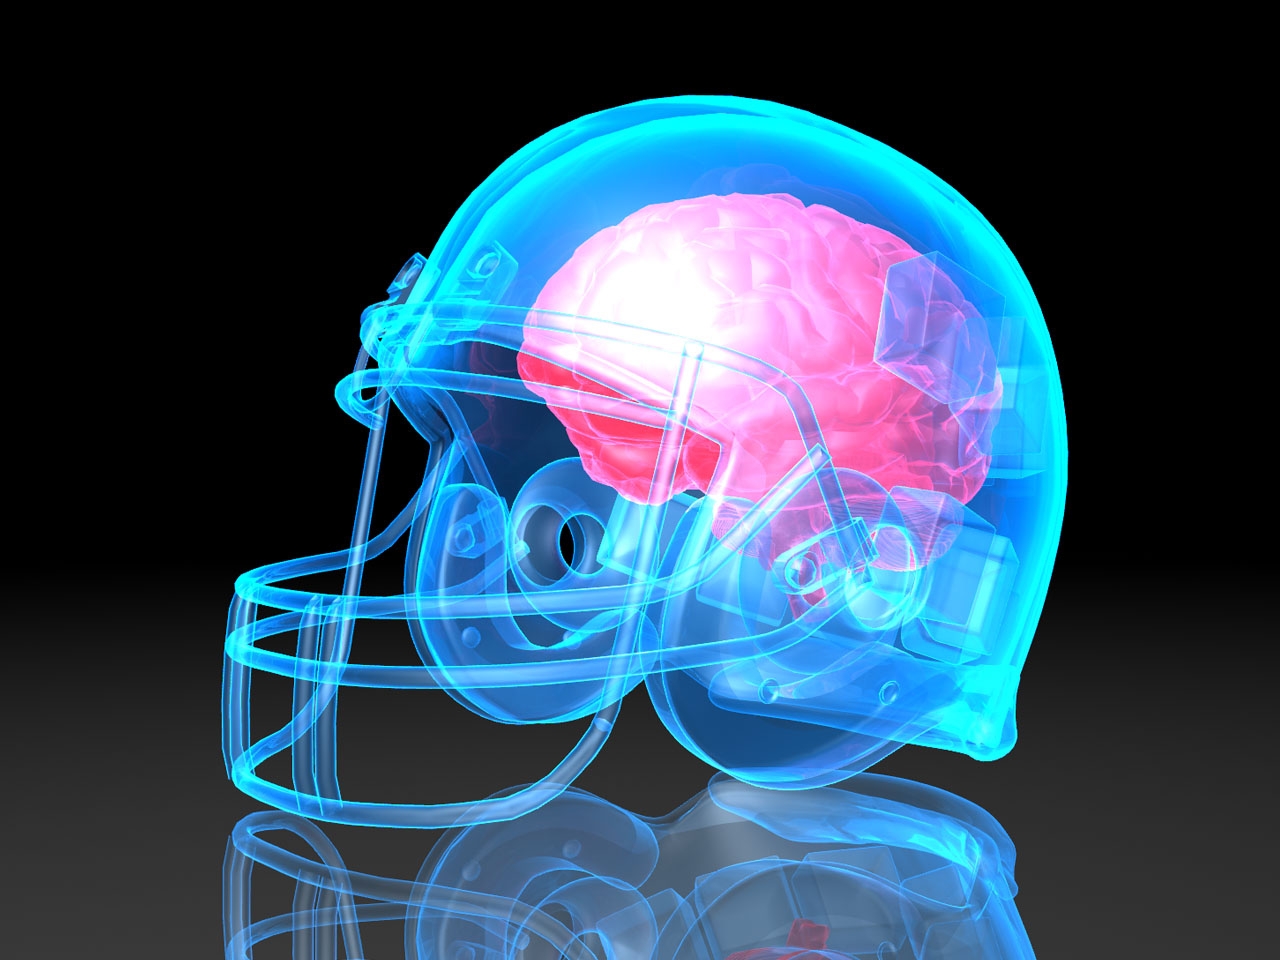 Kids and concussions